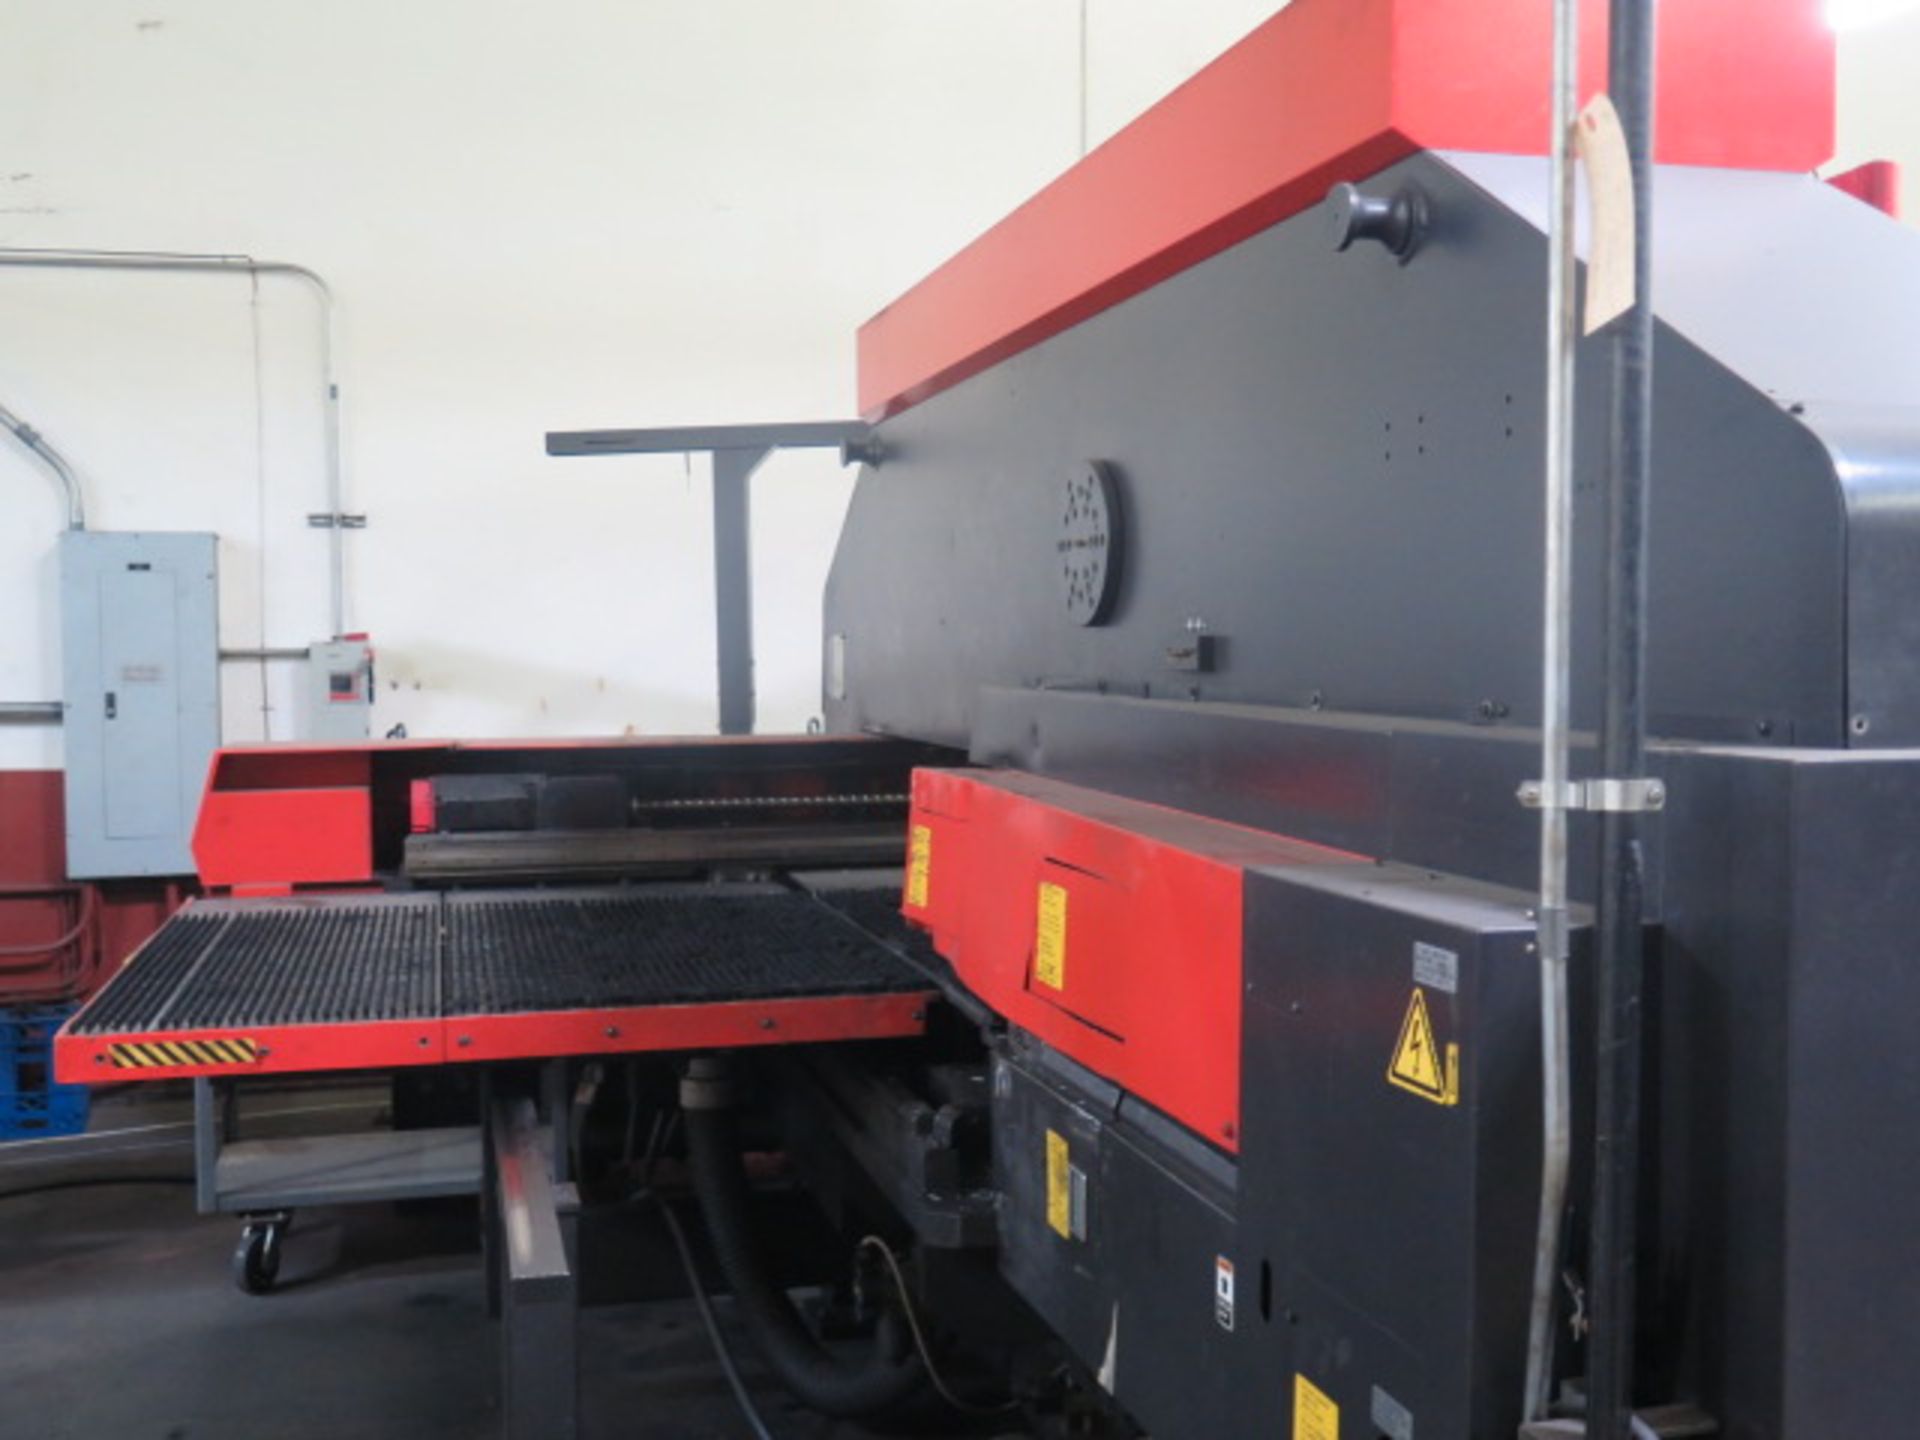 1998 Amada VIPROS 357 QUEEN 30 Ton CNC Turret Punch Press s/n 35730345 w/ O4P-C Controls, SOLD AS IS - Image 8 of 30